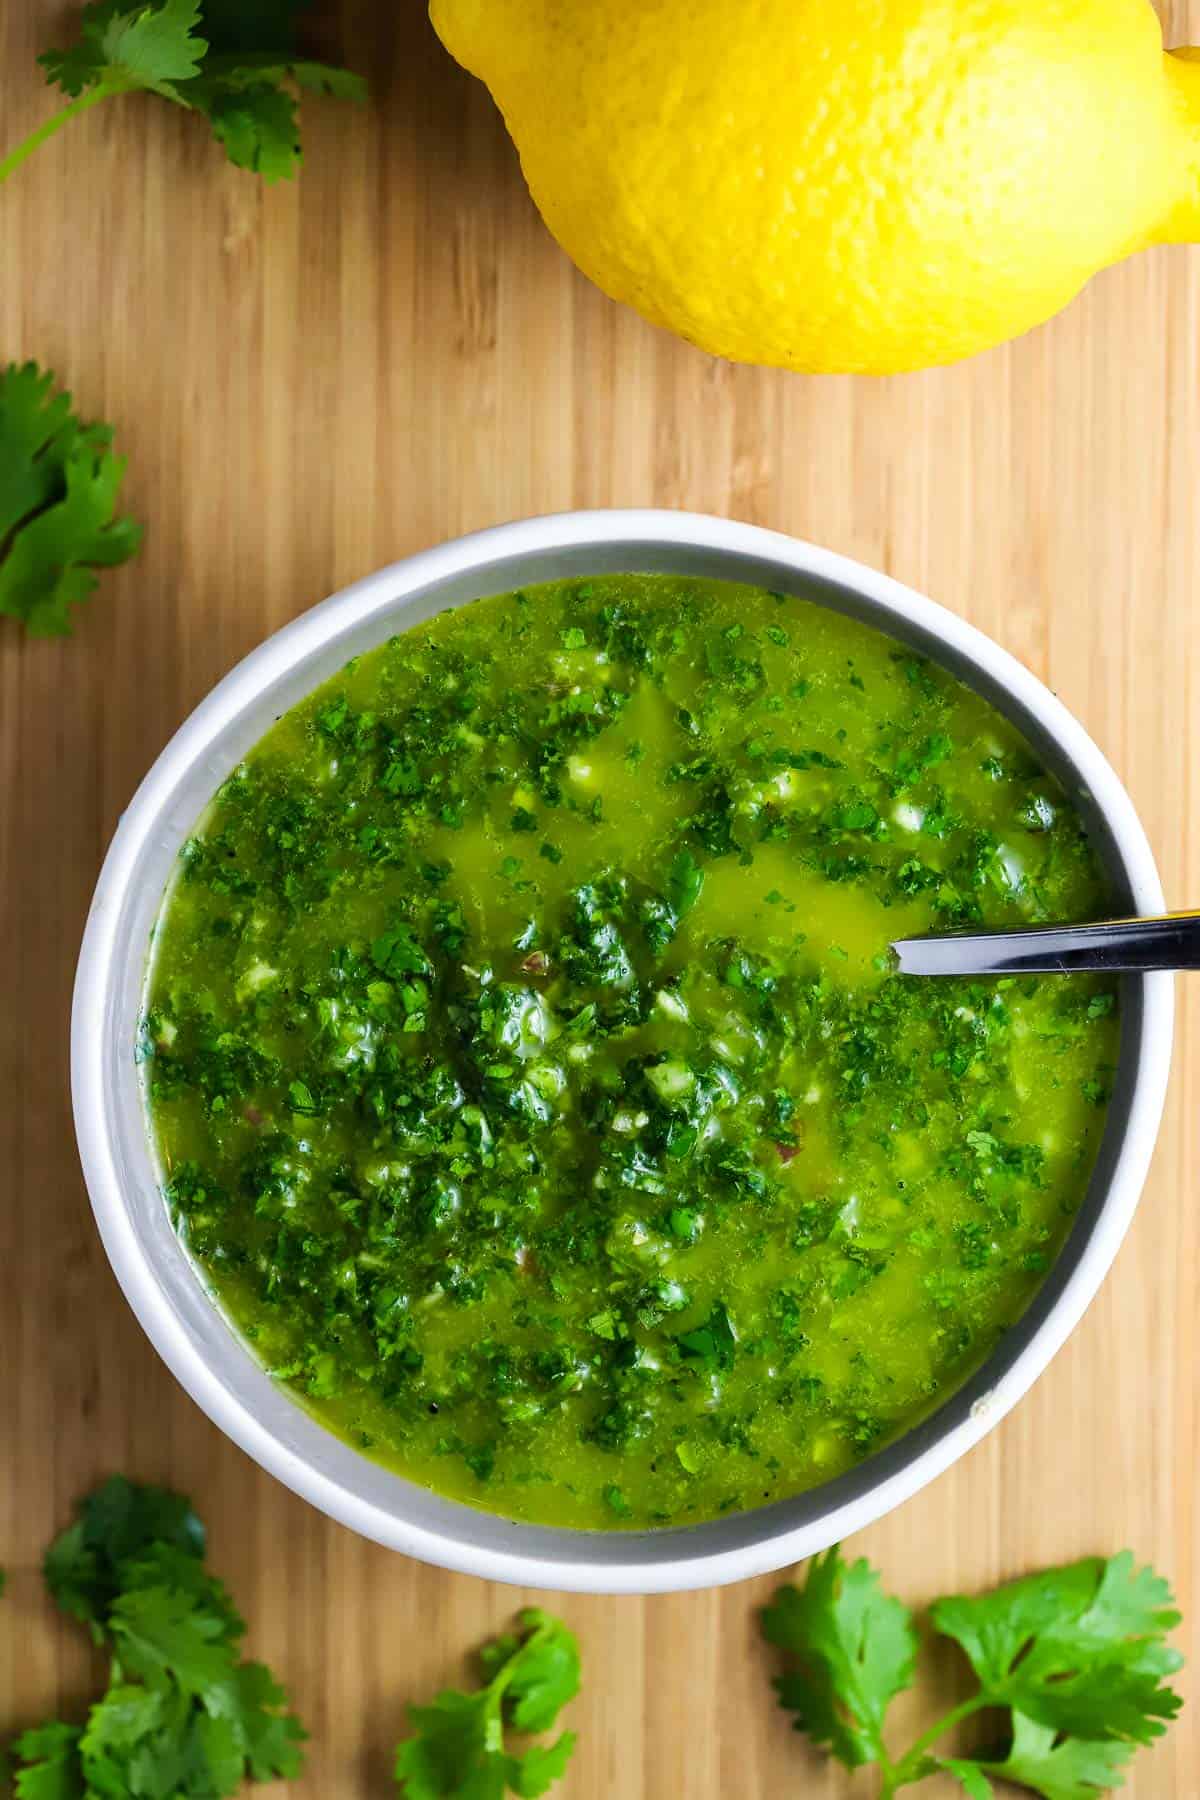 Overhead view of a bowl of chimichurri with a spoon in it and a whole lemon in the background.